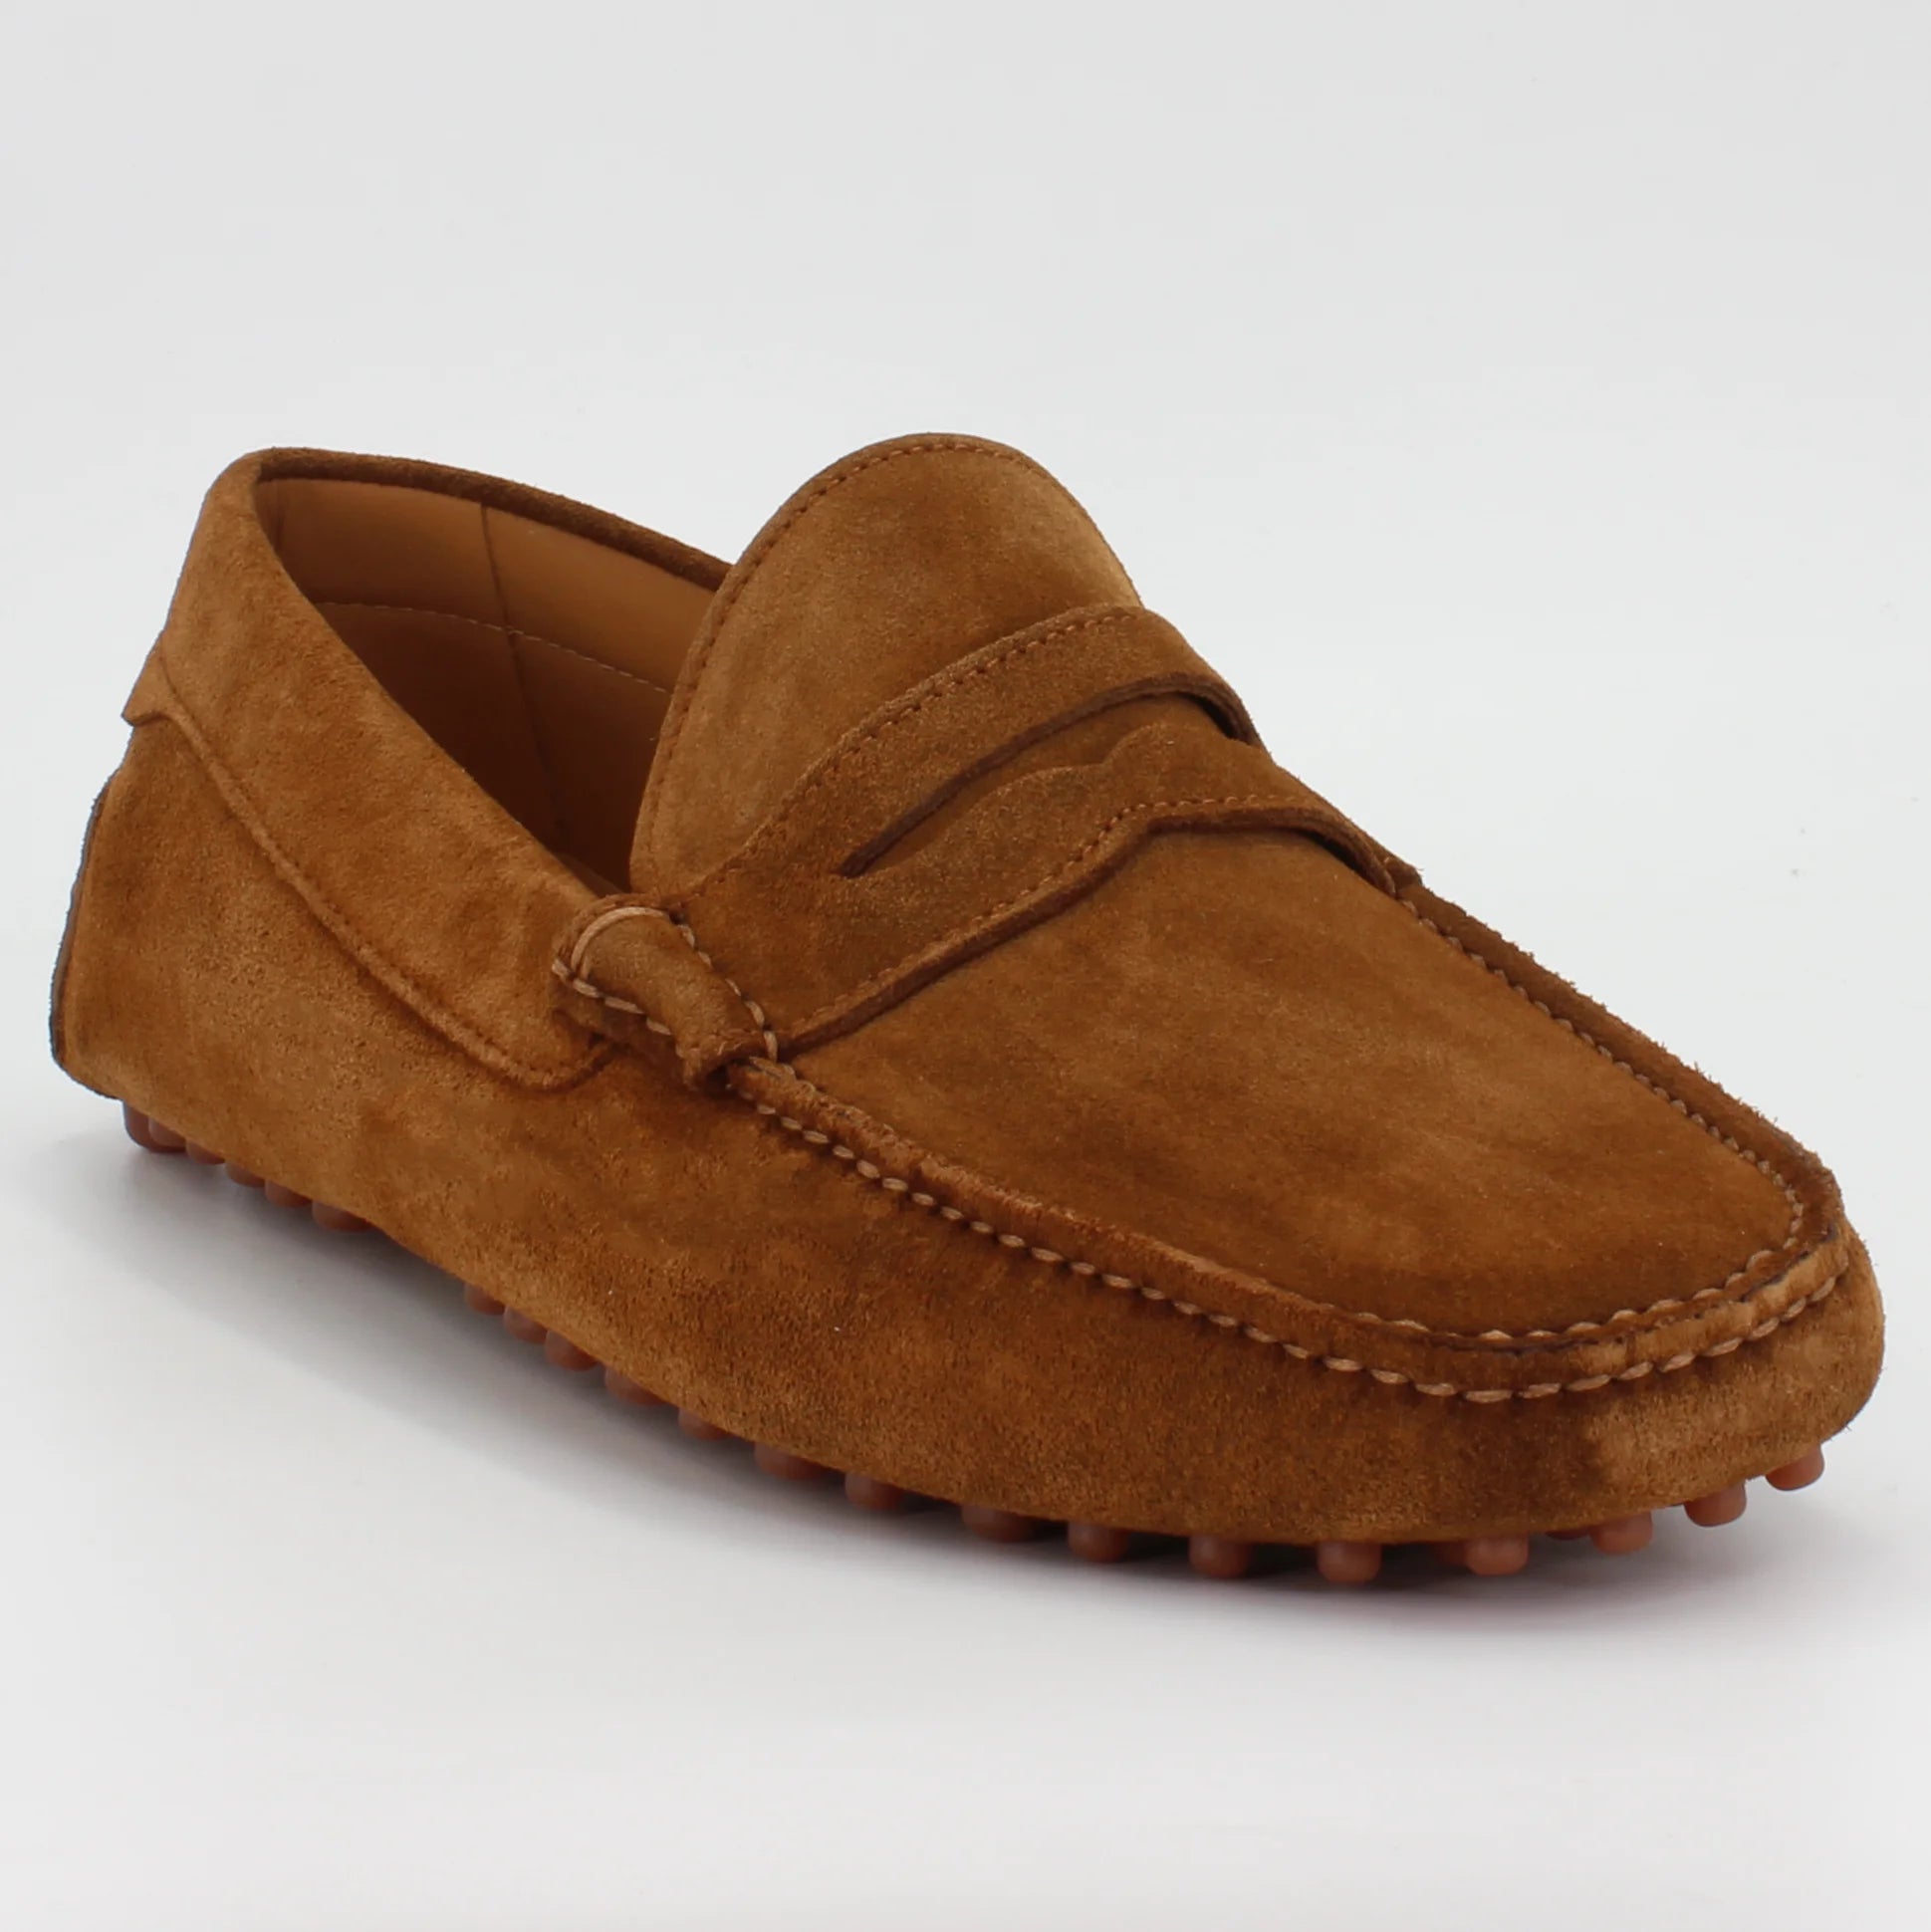 Shop Handmade Italian Leather suede moccasin in snuff velour (UO460002) or browse our range of hand-made Italian shoes for men in leather or suede in-store at Aliverti Cape Town, or shop online. We deliver in South Africa & offer multiple payment plans as well as accept multiple safe & secure payment methods.